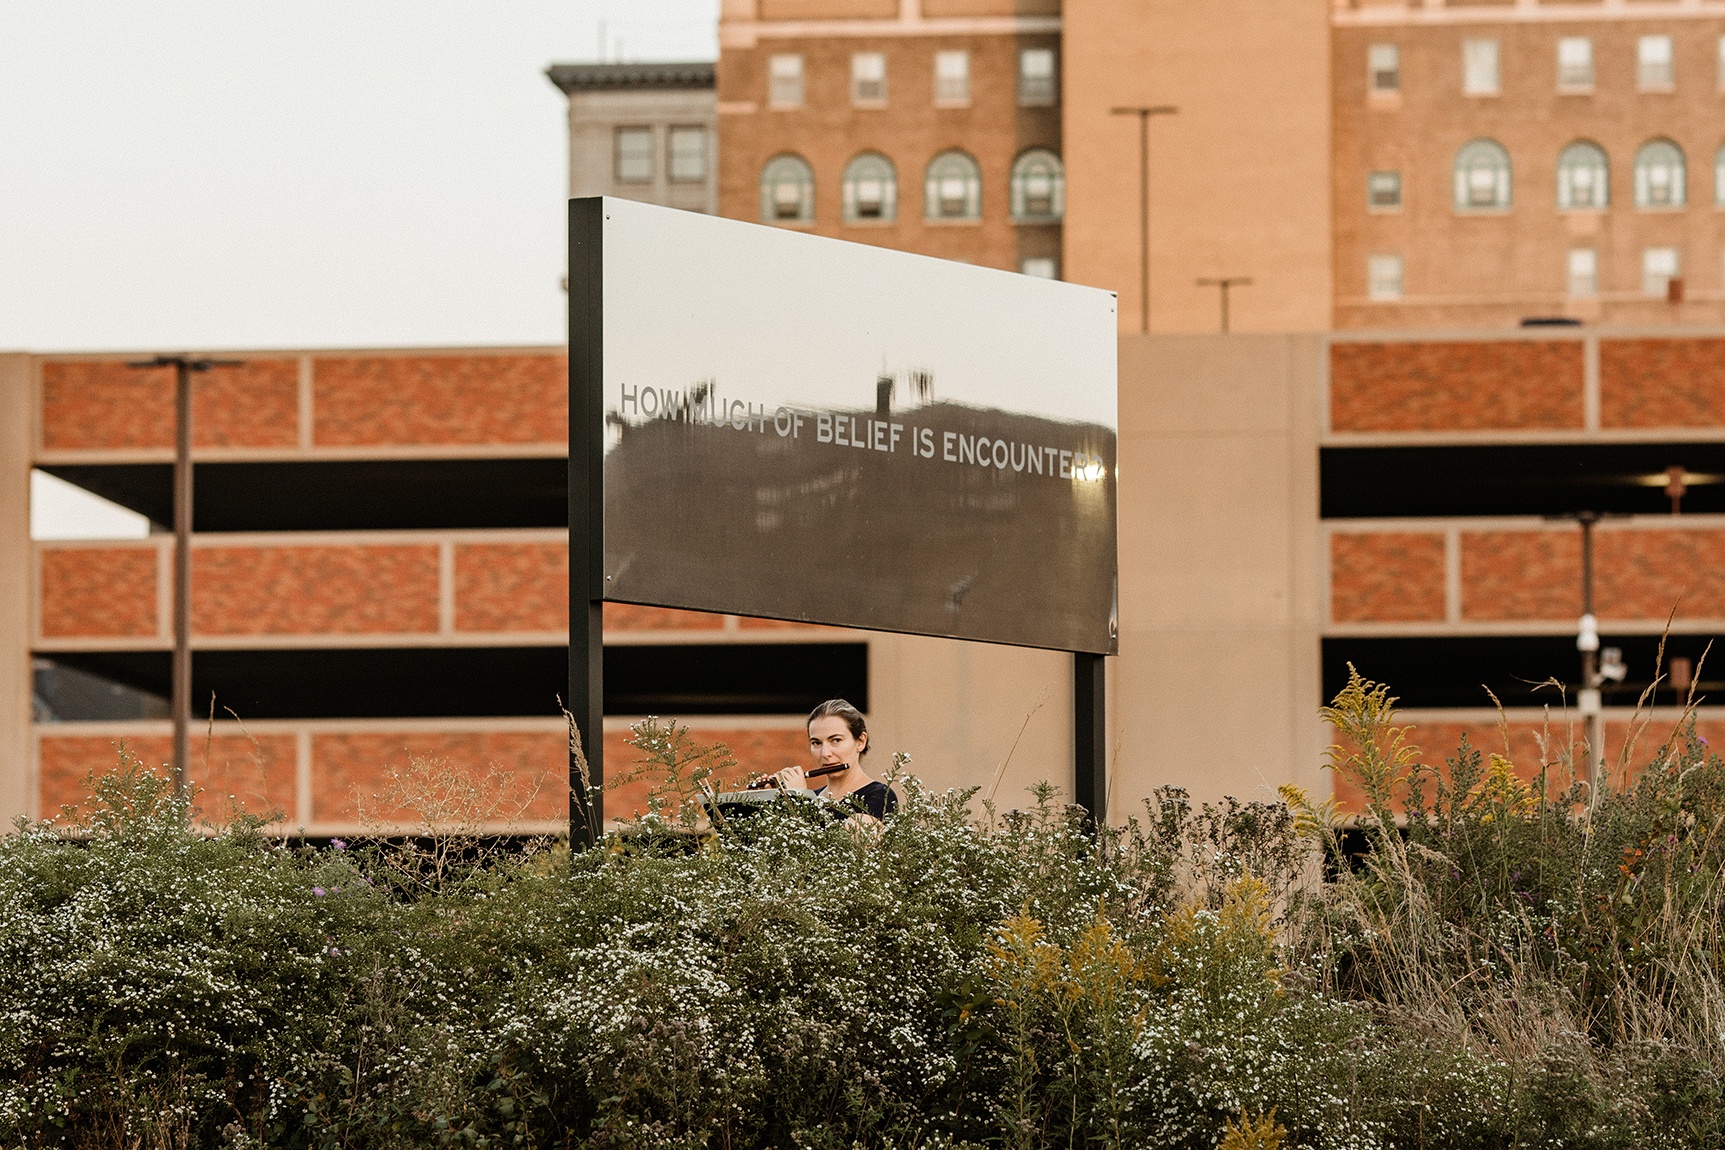 A St. Louis Symphony Orchestra musician performing outdoors in Park-Like while standing below a large billboard by artist Chloë Bass